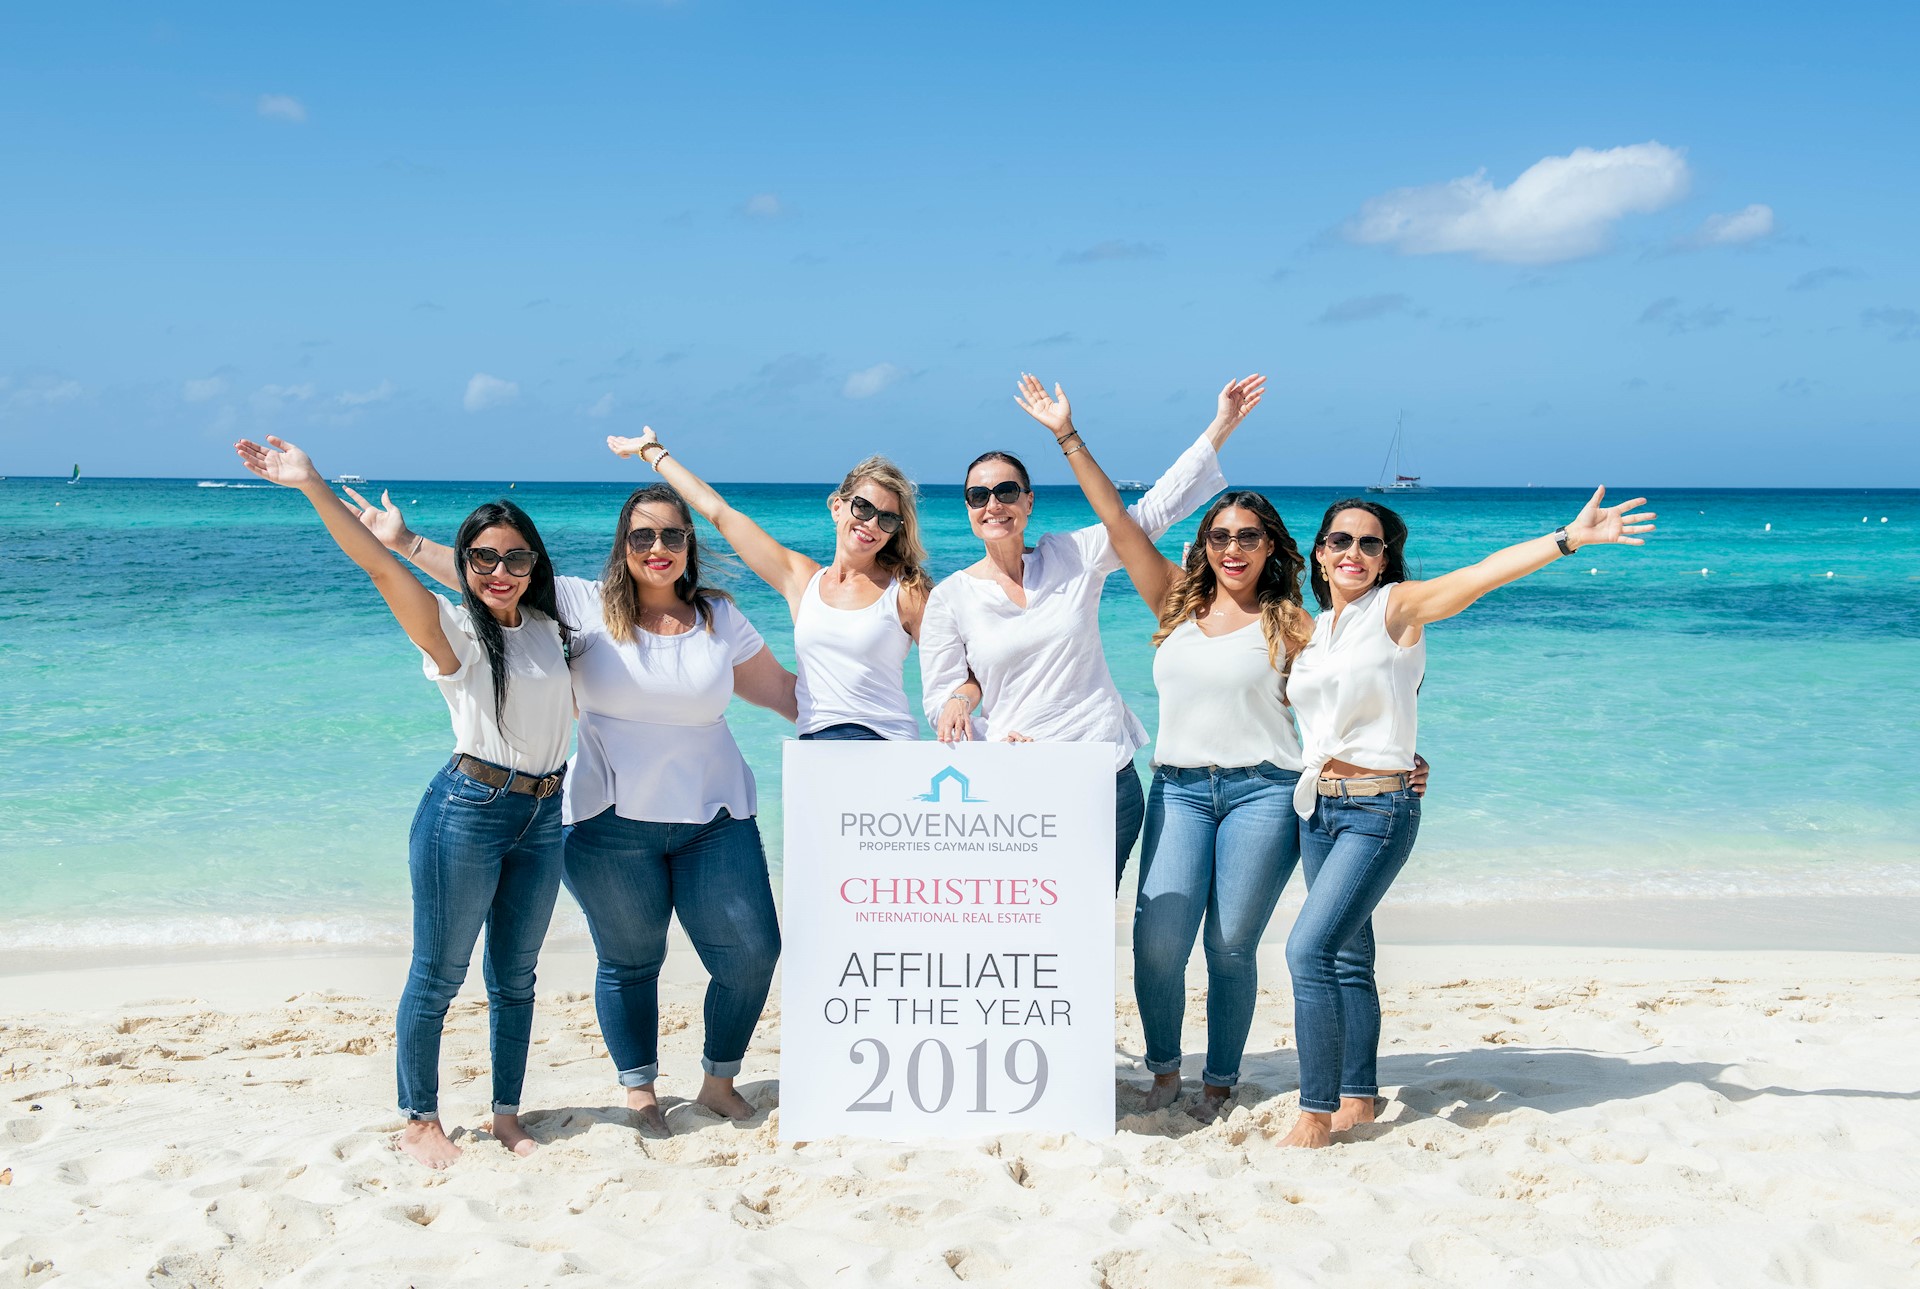 Provenance Properties Cayman Islands named Affiliate of the Year